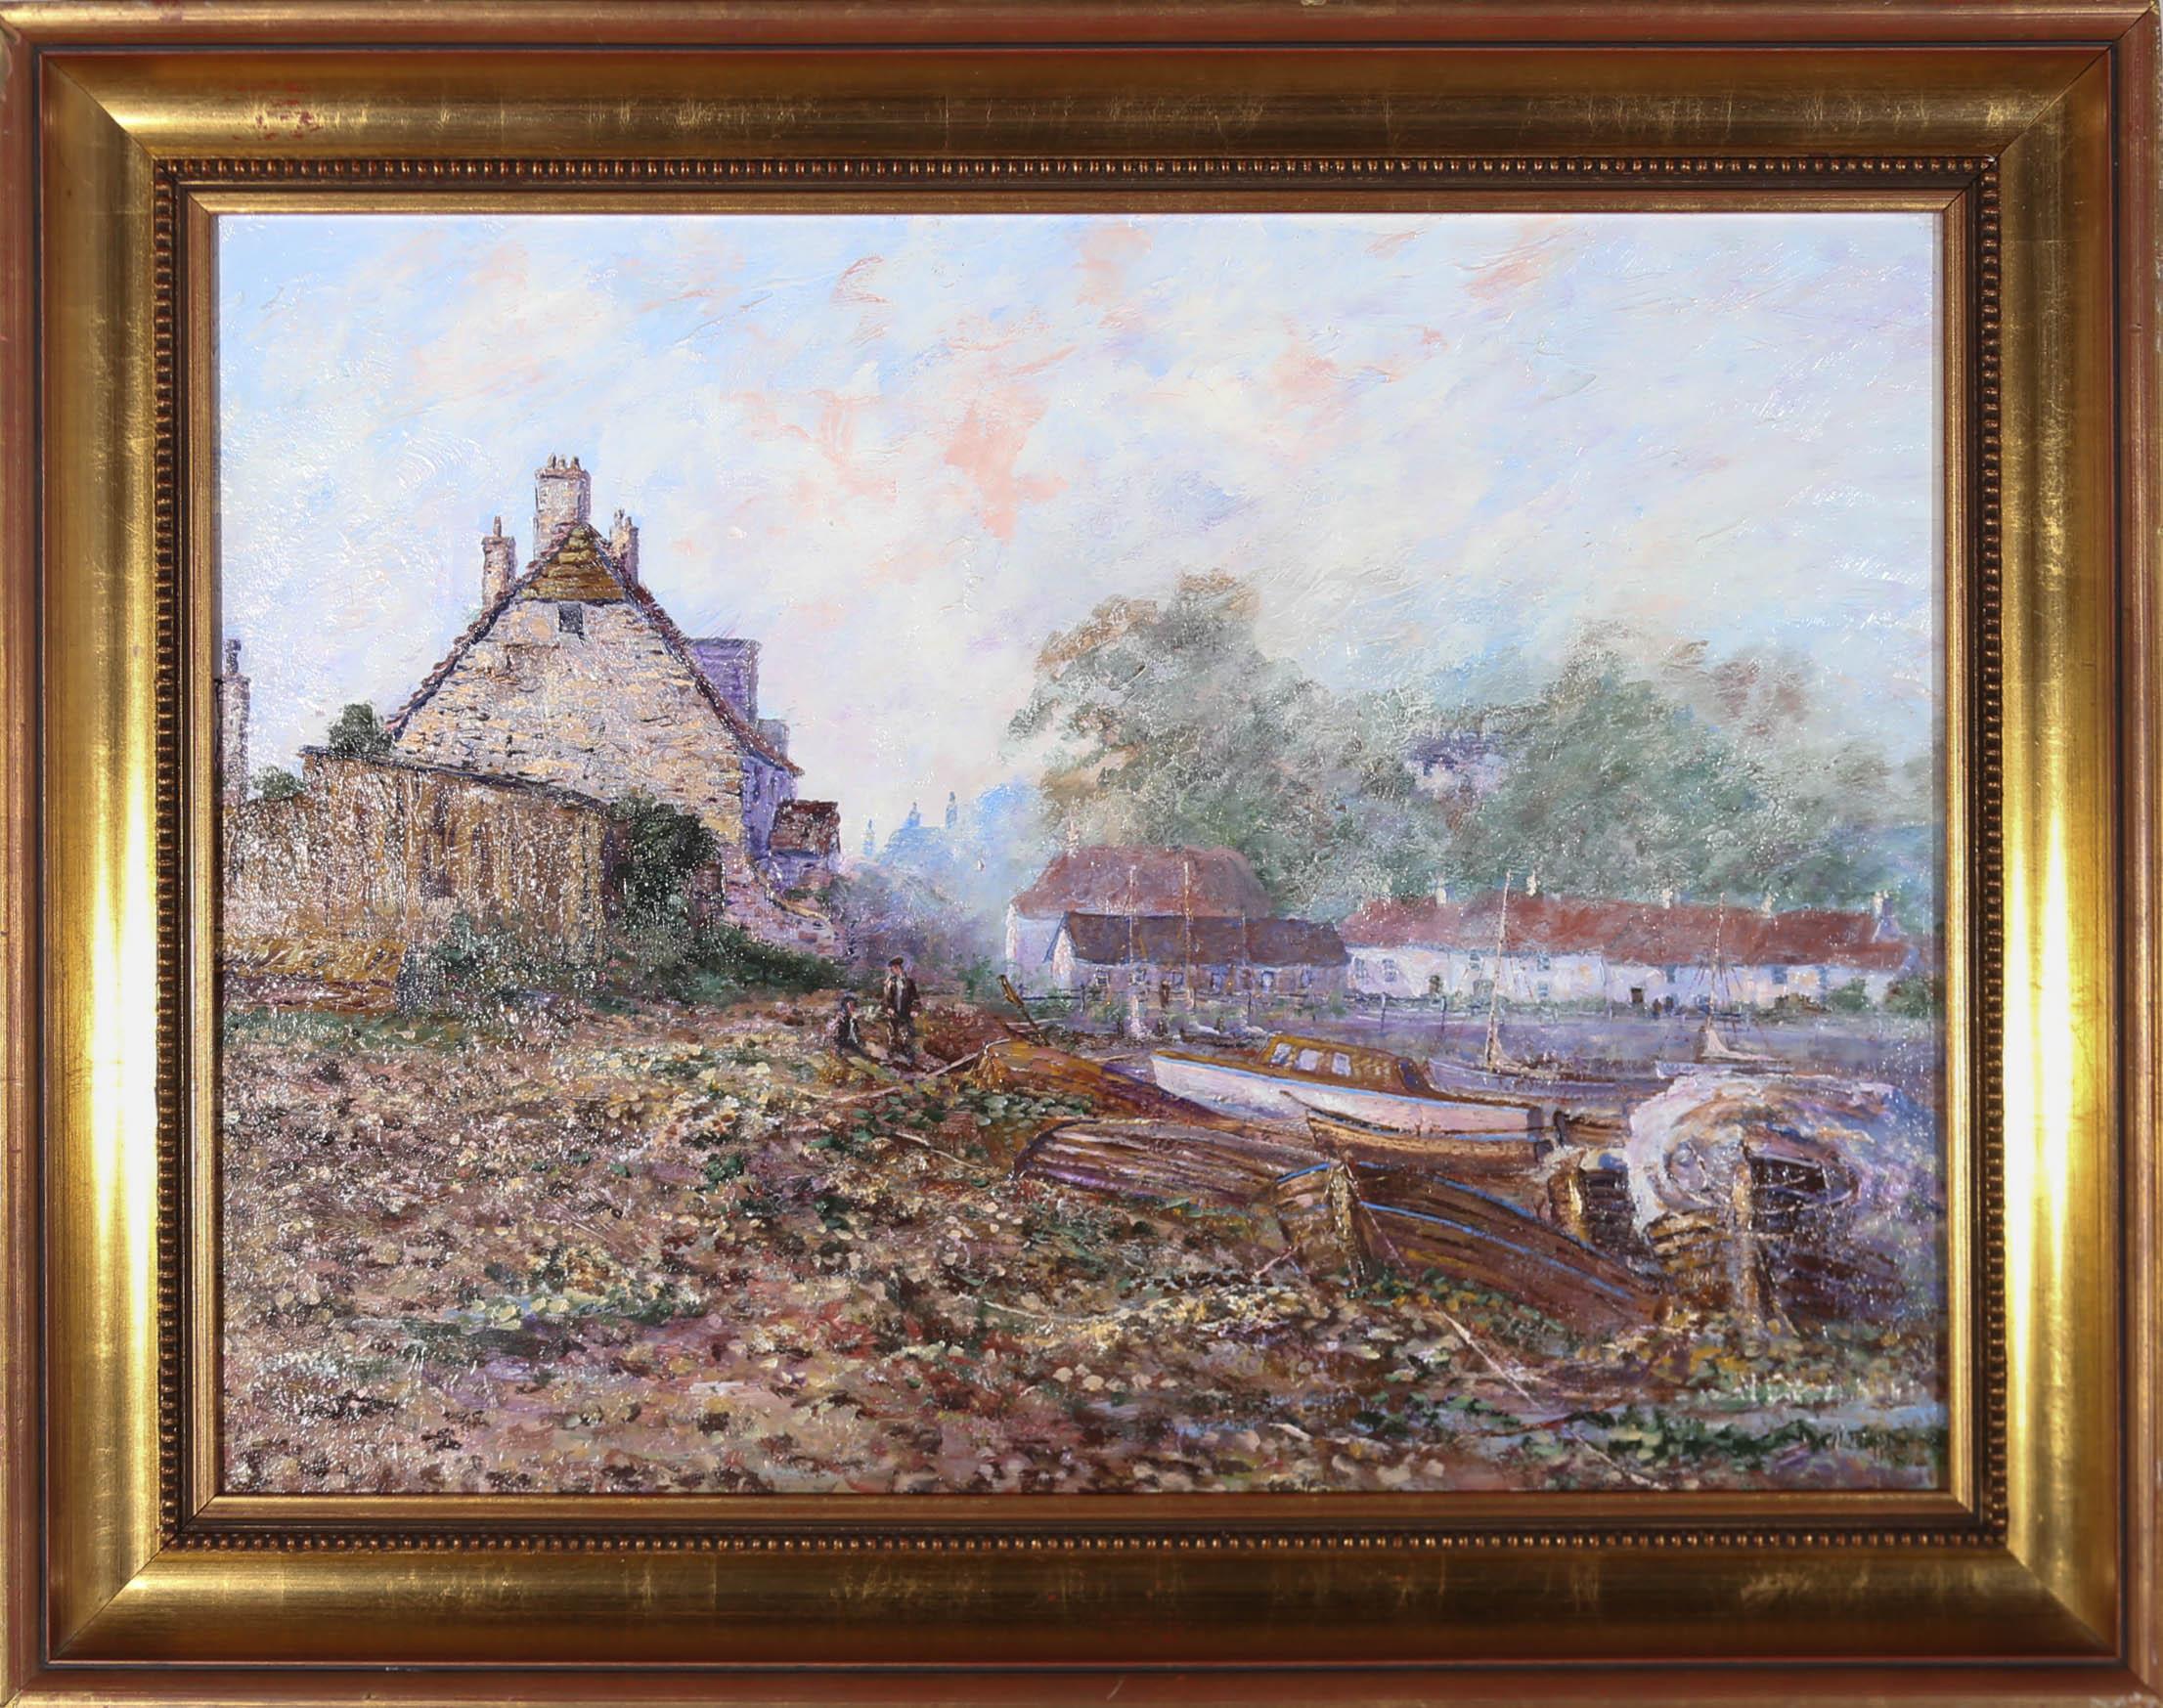 A charming scene depicting a pebbled dock with fishing boats beached along the shore. The bank is surrounded by quaint cottages and fishermen preparing nets. Signed indistinctly to the lower right. Presented in a gilt frame. On board.
